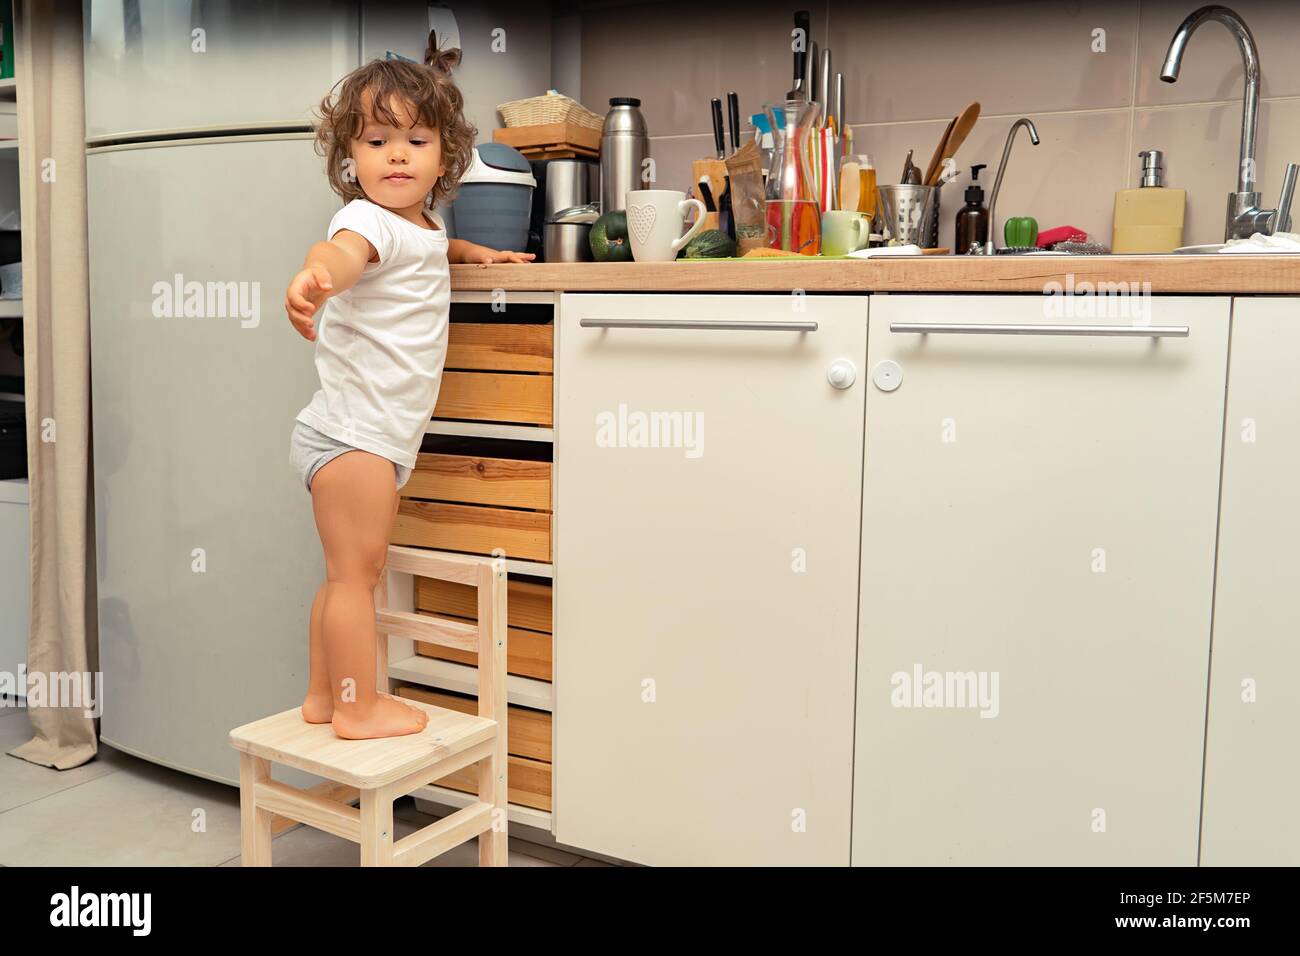 Little boy with long hair standing on a chair in the kitchen and asks for help Stock Photo